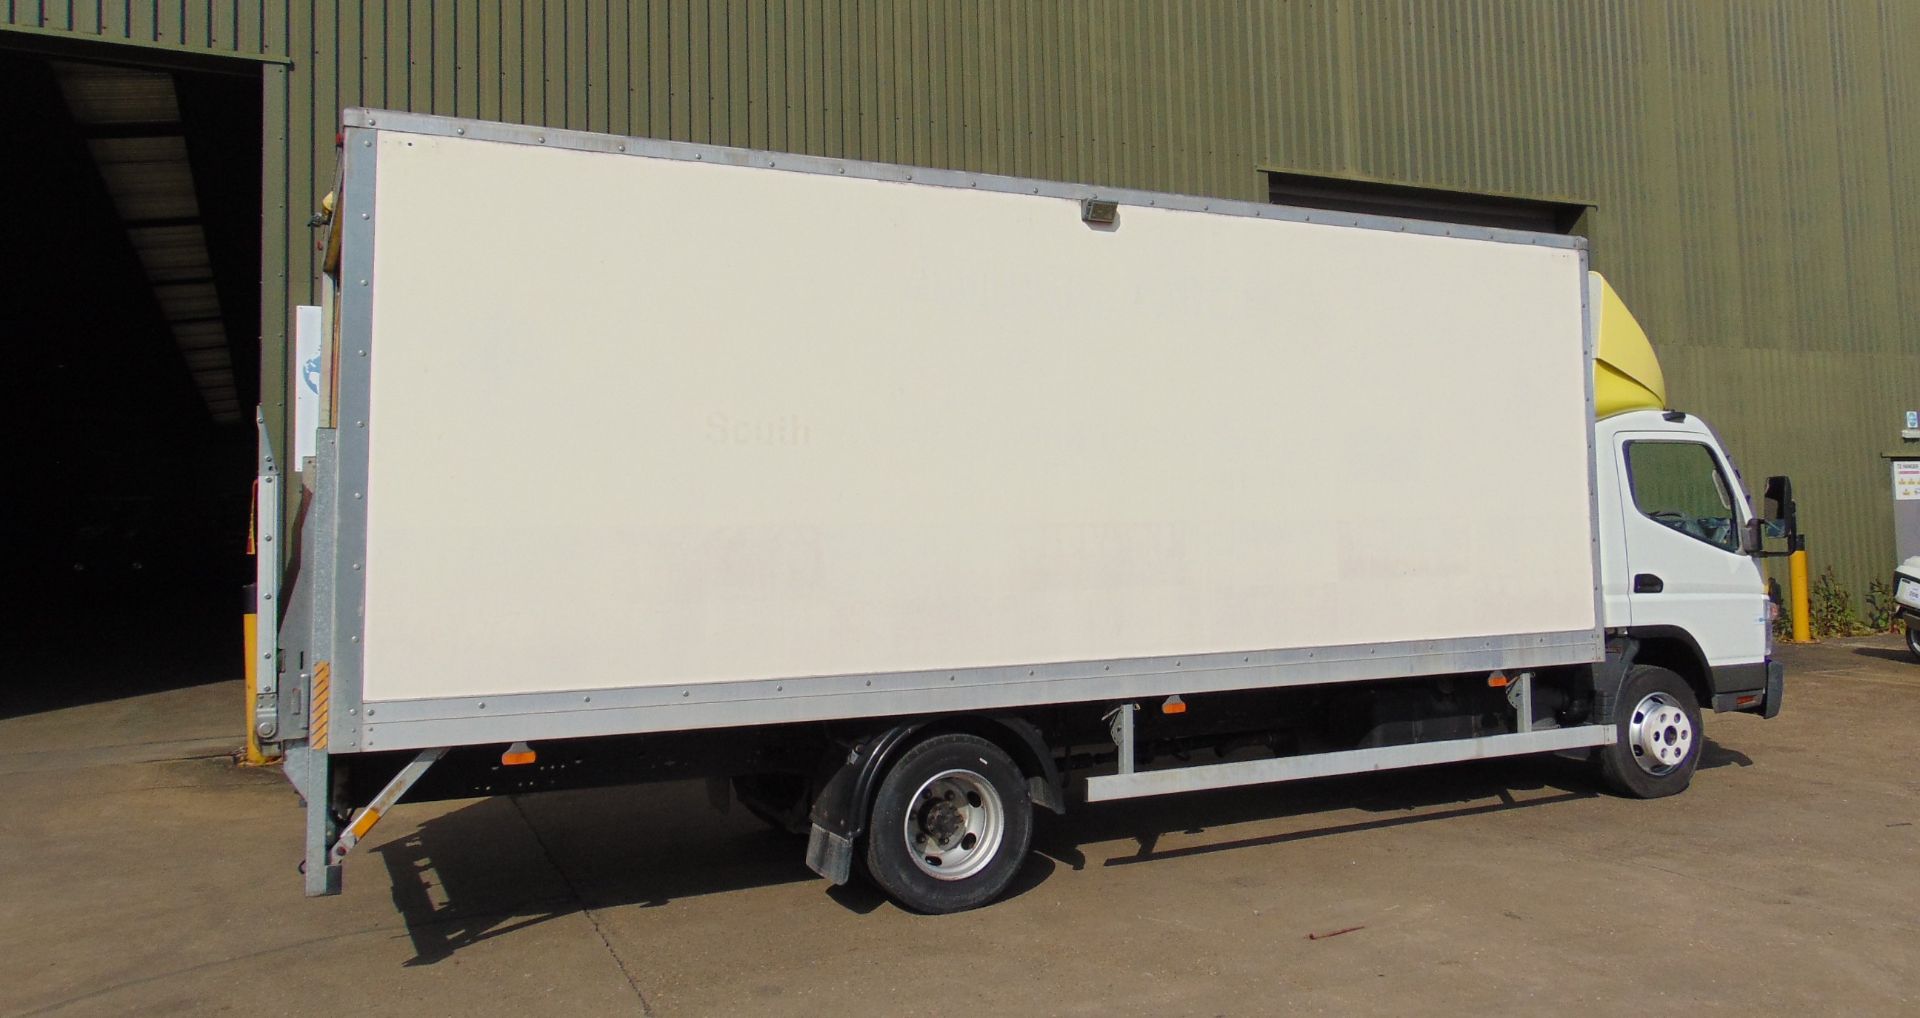 2011 Mitsubishi Fuso Canter Box lorry 7.5T - Only 5400 Miles! - Image 11 of 51